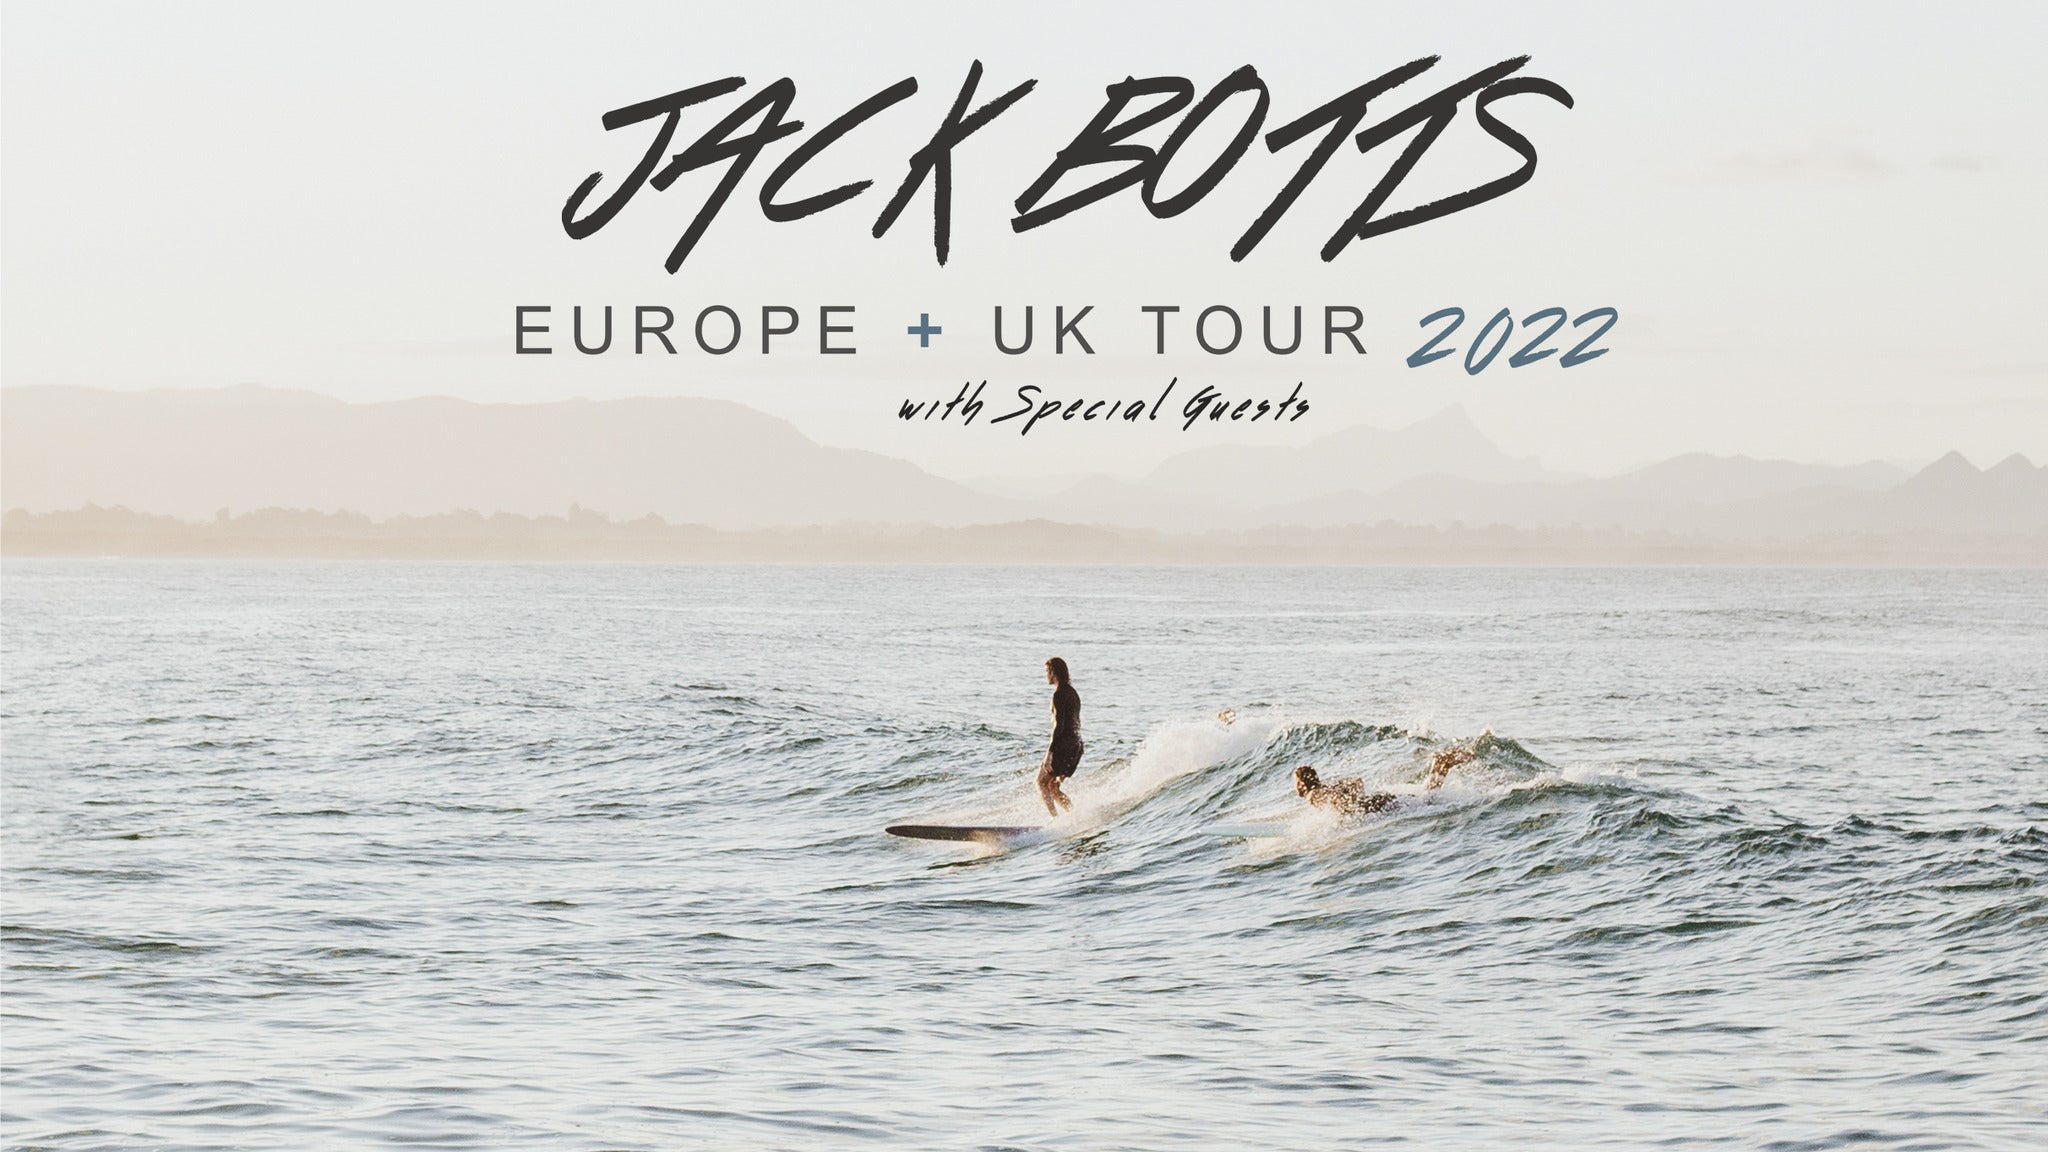 Image used with permission from Ticketmaster | Jack Botts tickets